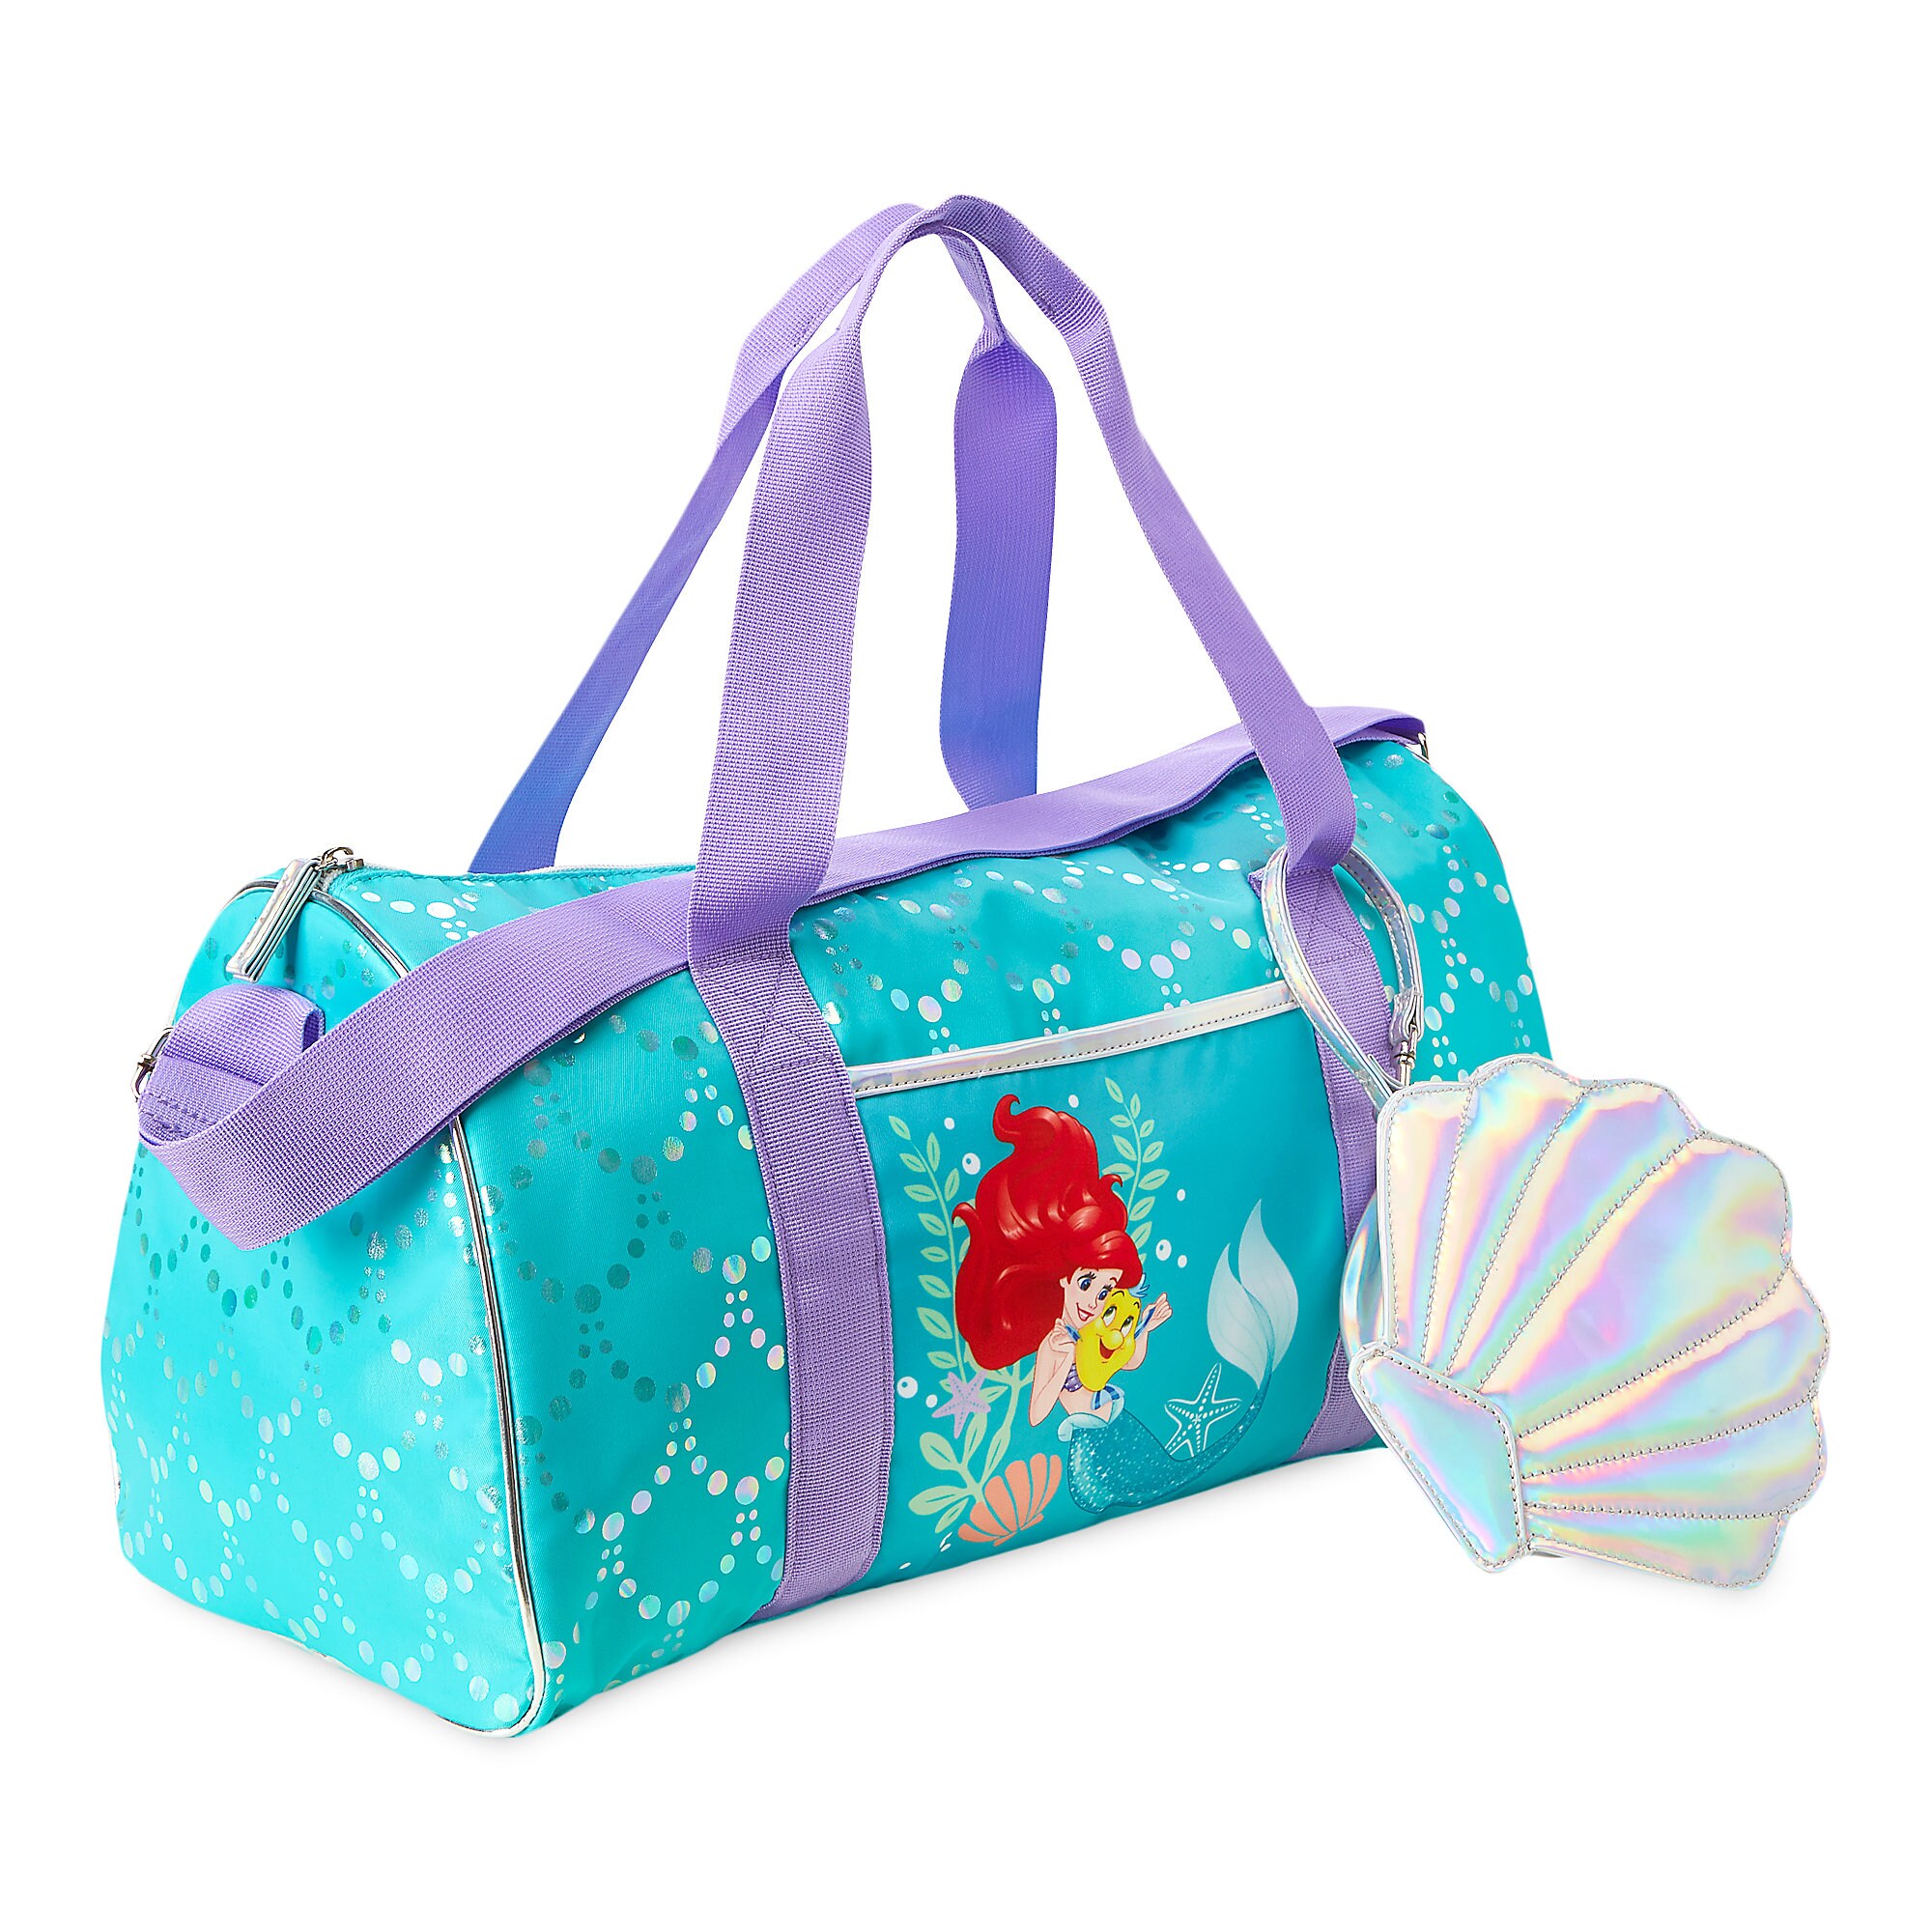 Ariel and Flounder Duffle Bag for Kids - The Little Mermaid